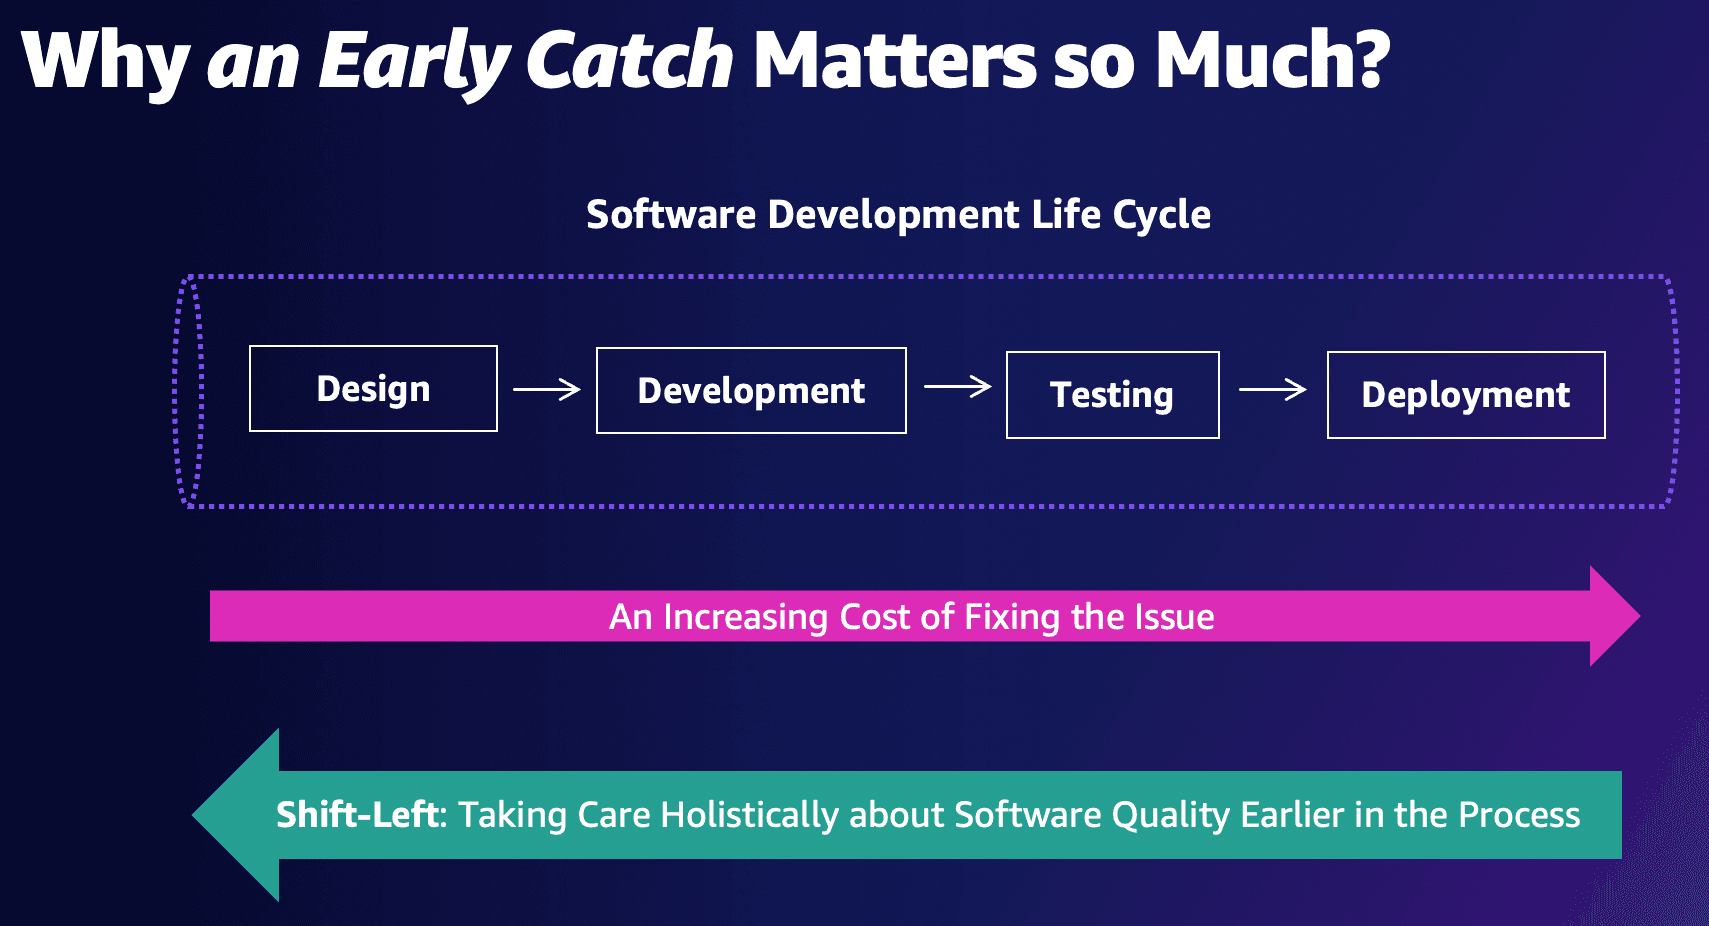 Slide from presentation at AWS Berlin Summit 2022 showing slide title "Why an early catch matters so much?". Slide shows the Software Development Life Cycle with right-pointing arrow "An increasing cost of fixing the issue" and a left-pointing arrow "Shift-left: Taking care holistically about software quality earlier in the process"